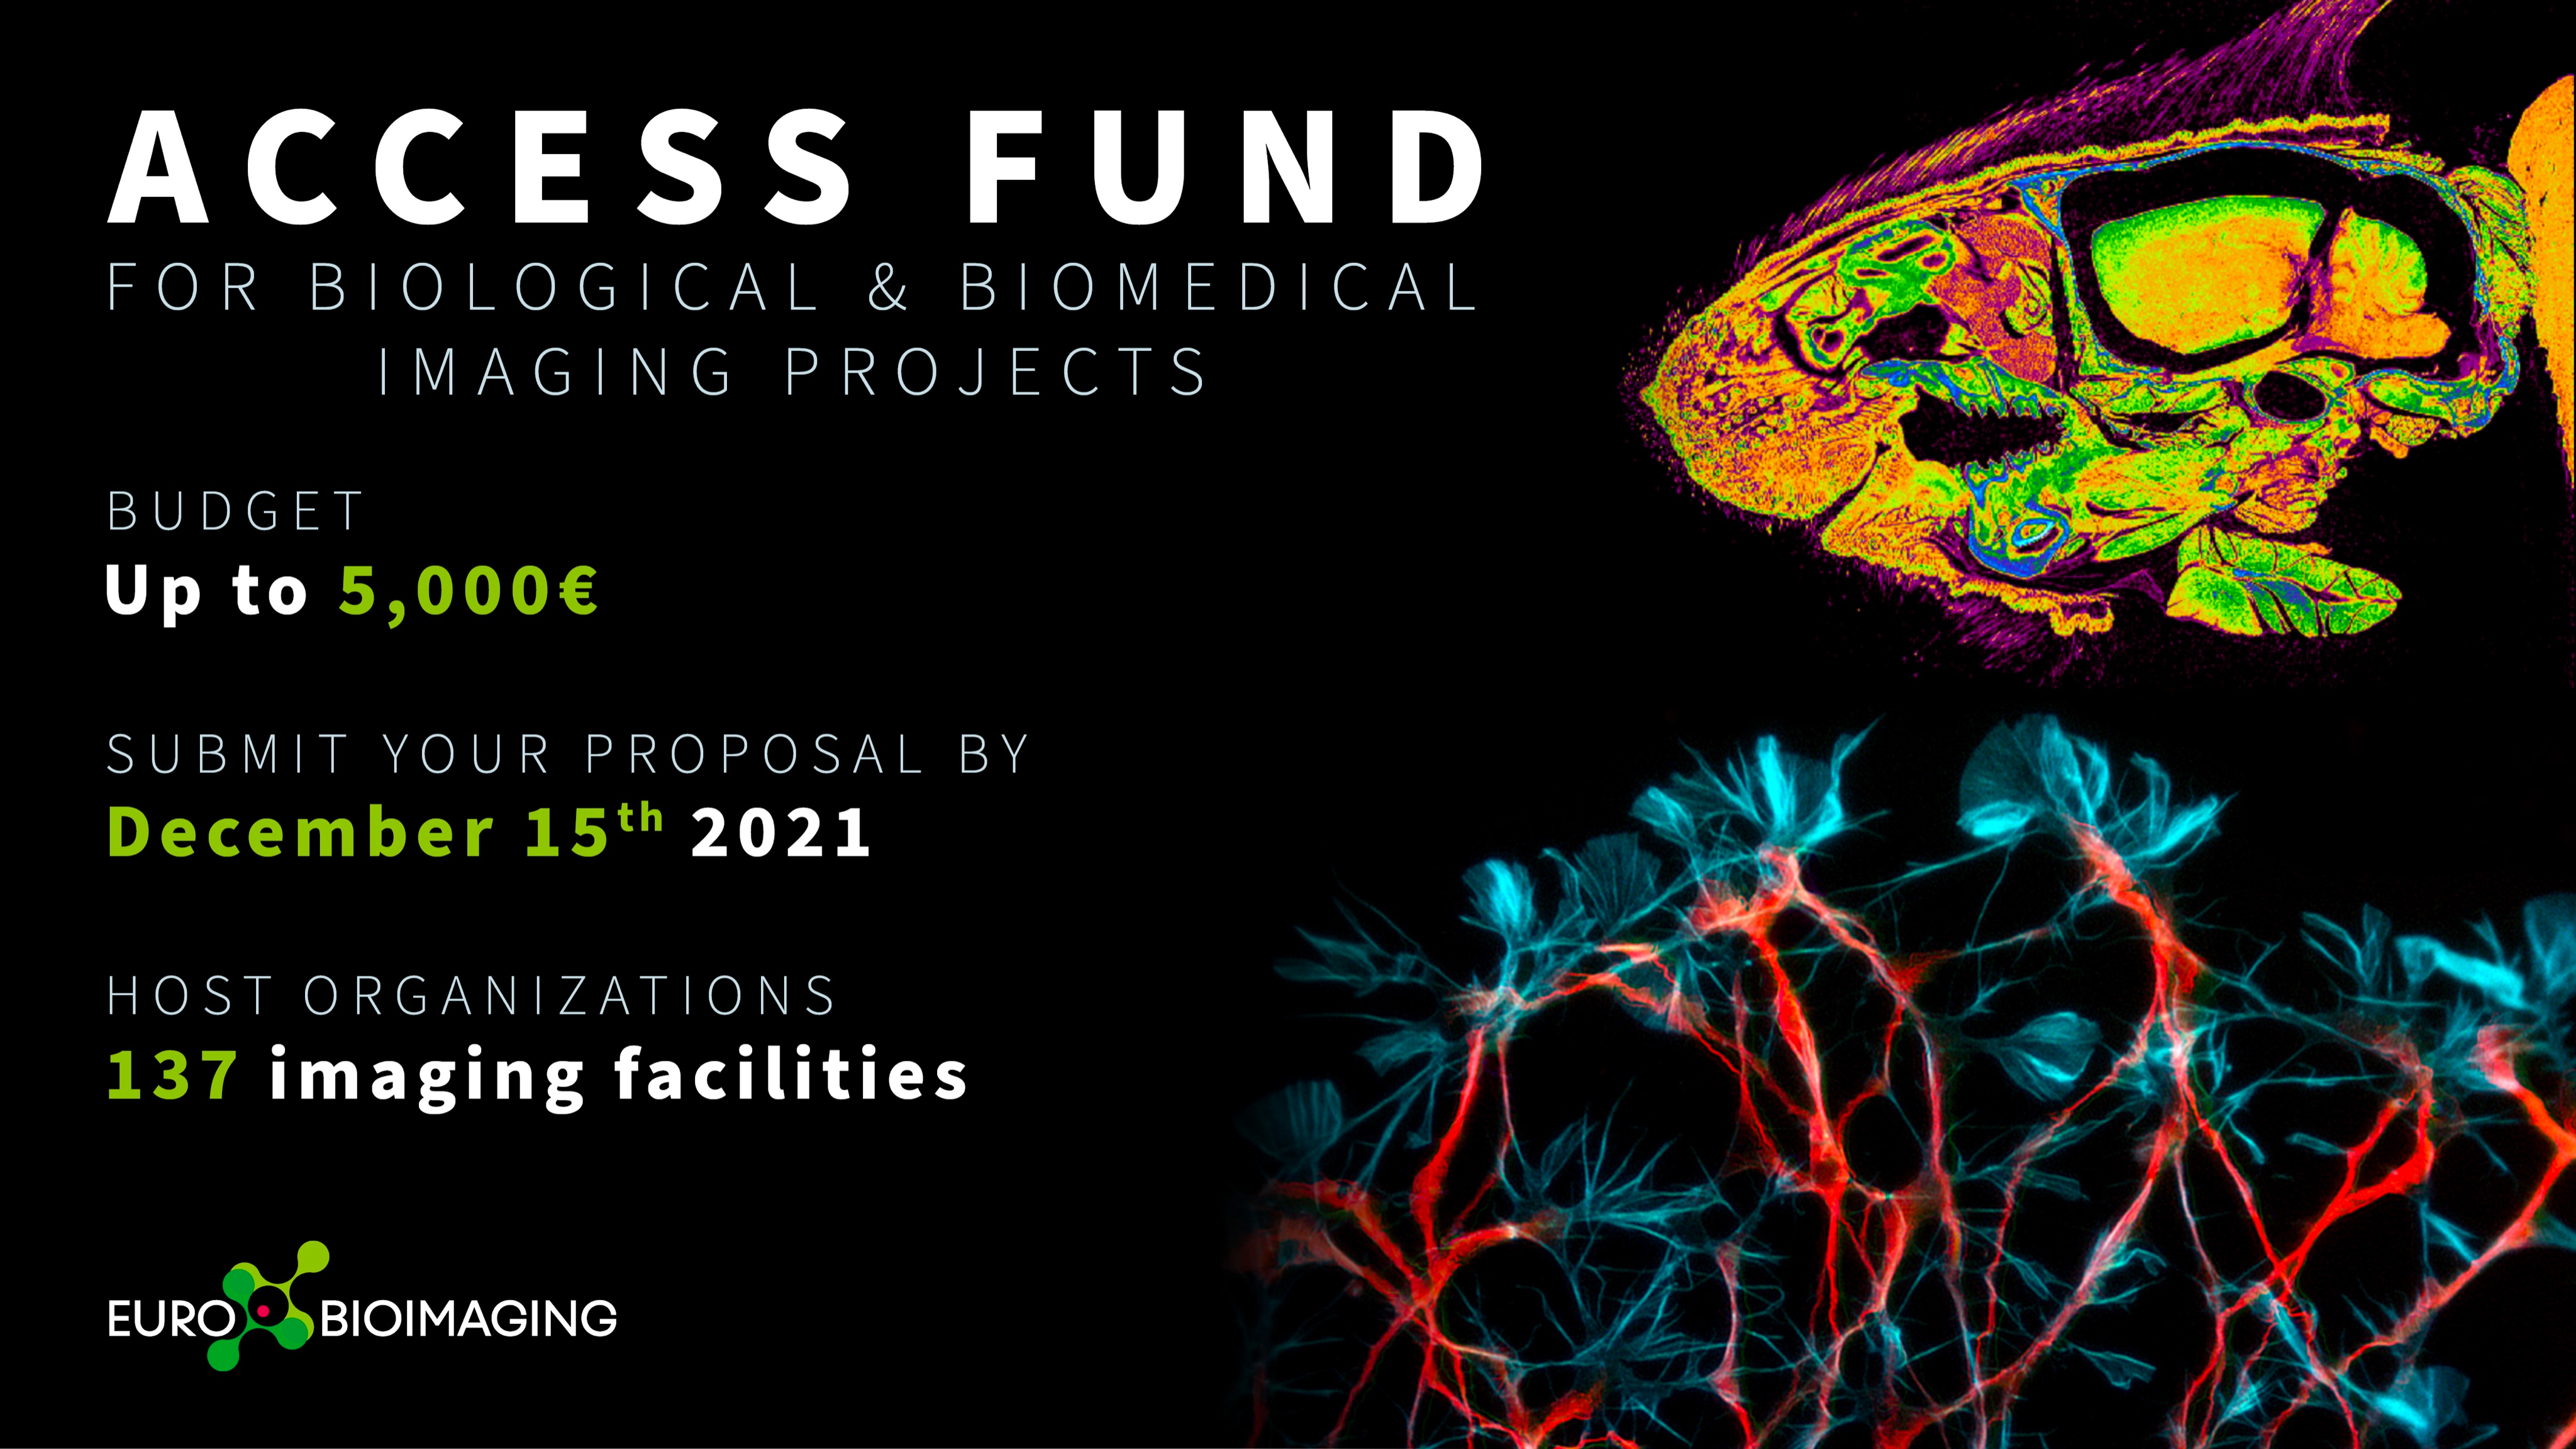 Apply funding for your Euro-BioImaging project